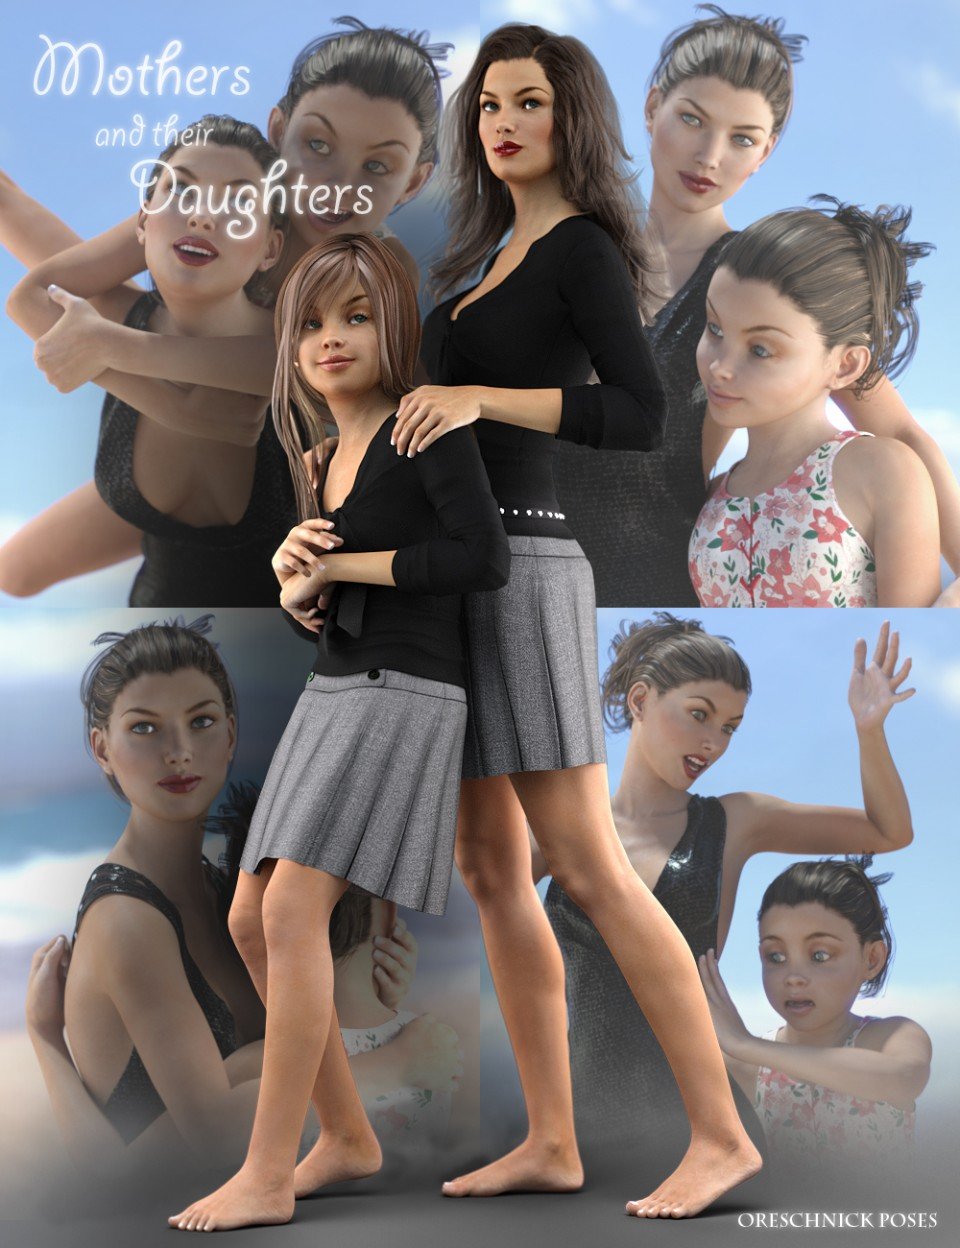 Oreschnick Poses: Mothers and their Daughters Poses G2F G3F_DAZ3DDL